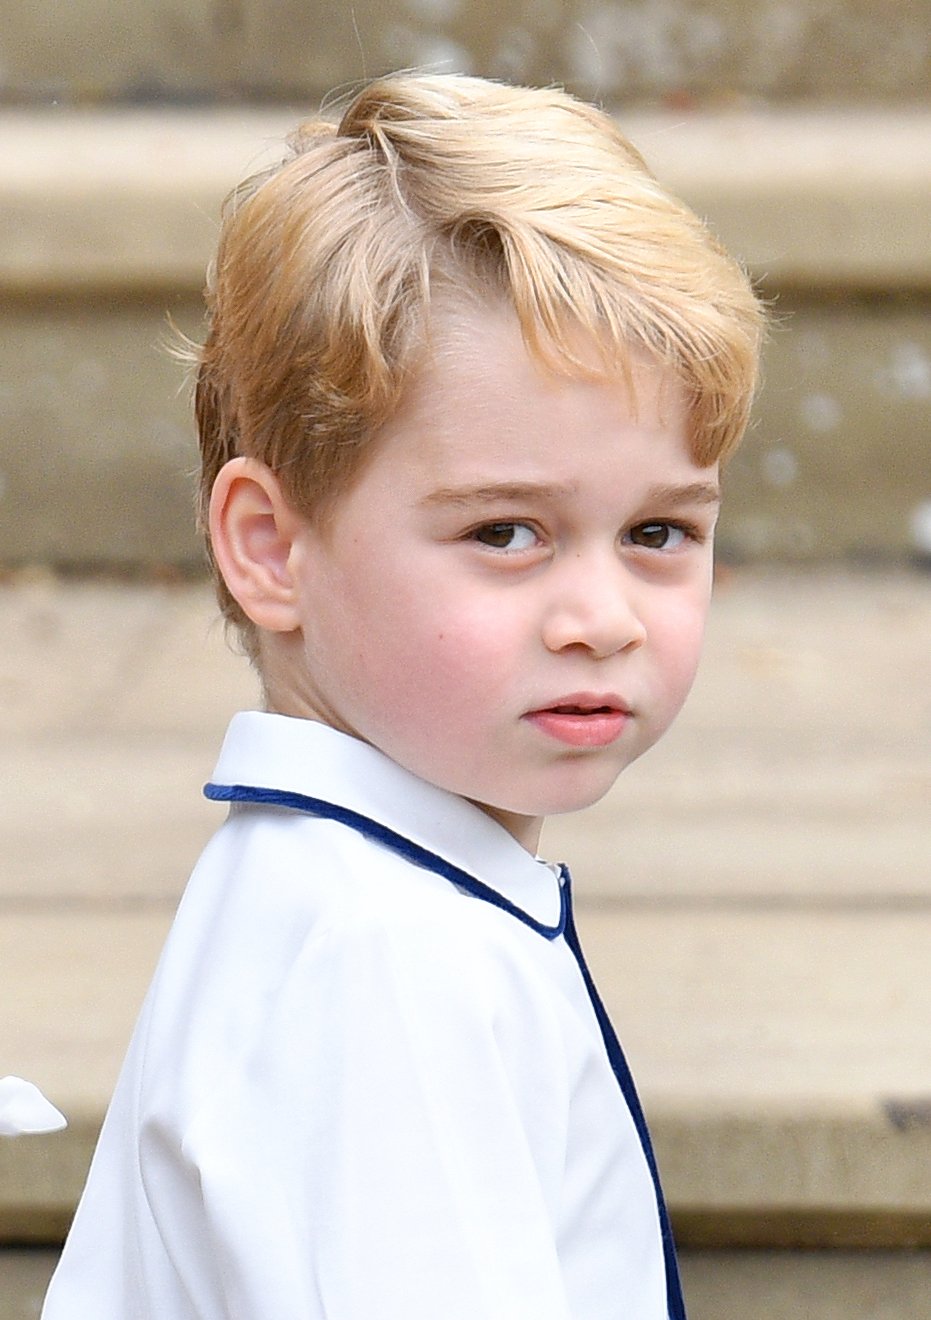 Prince George at the wedding of Princess Eugenie of York and Jack Brooksbank at St George's Chapel on October 12, 2018 in Windsor, England. | Source: Getty Images